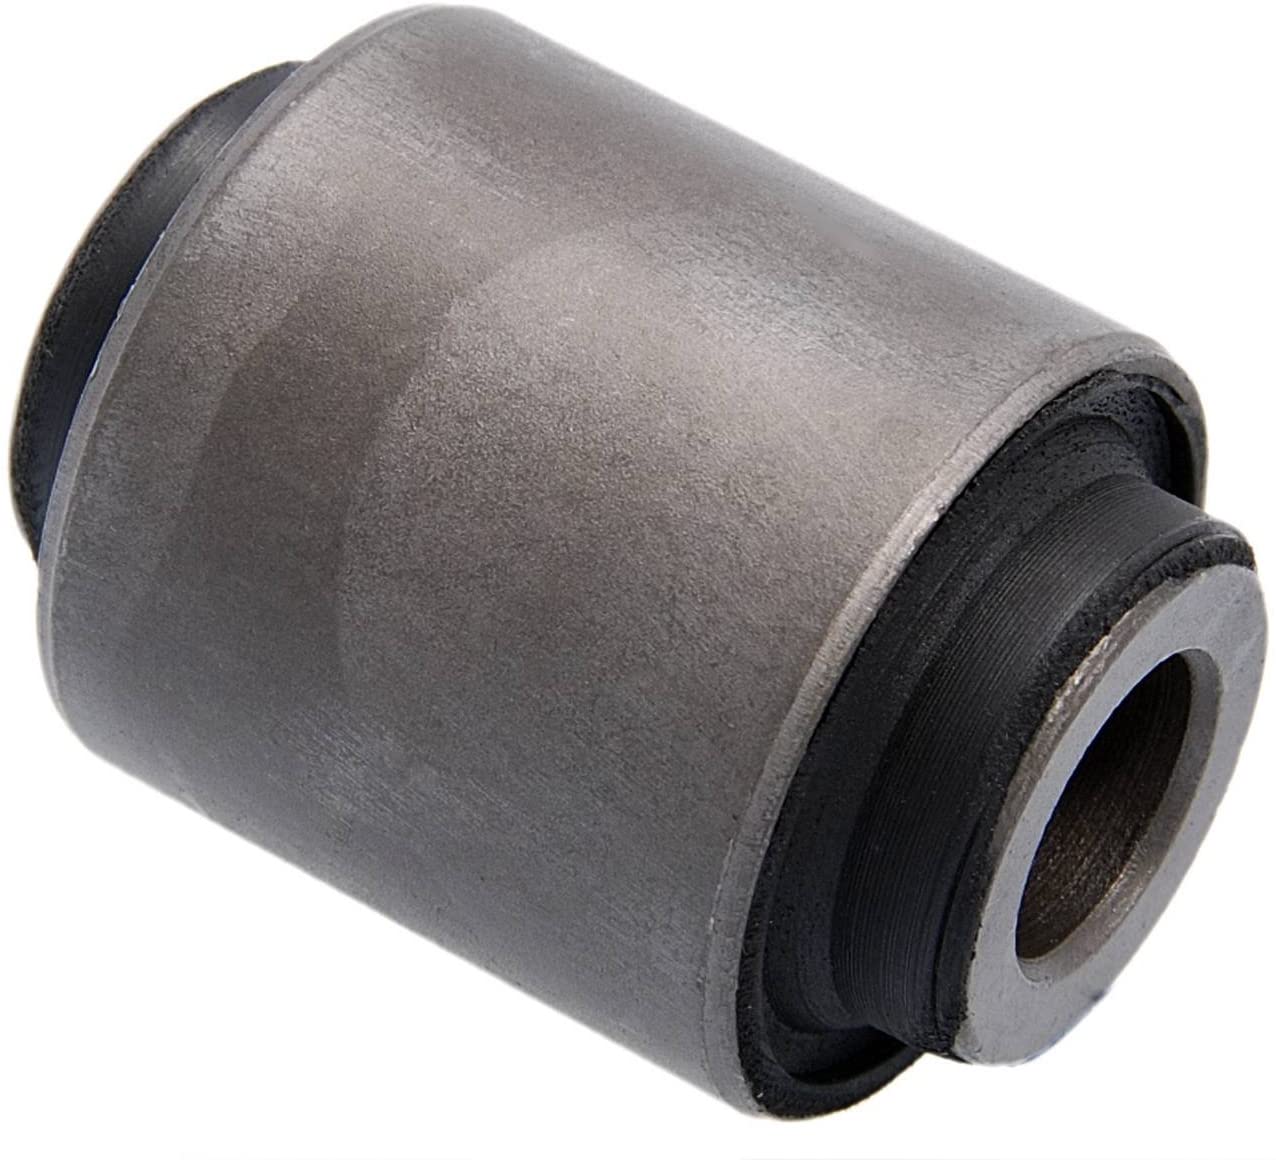 55110Jd000 - Arm Bushing (For Track Control Arm) For Nissan - Febest